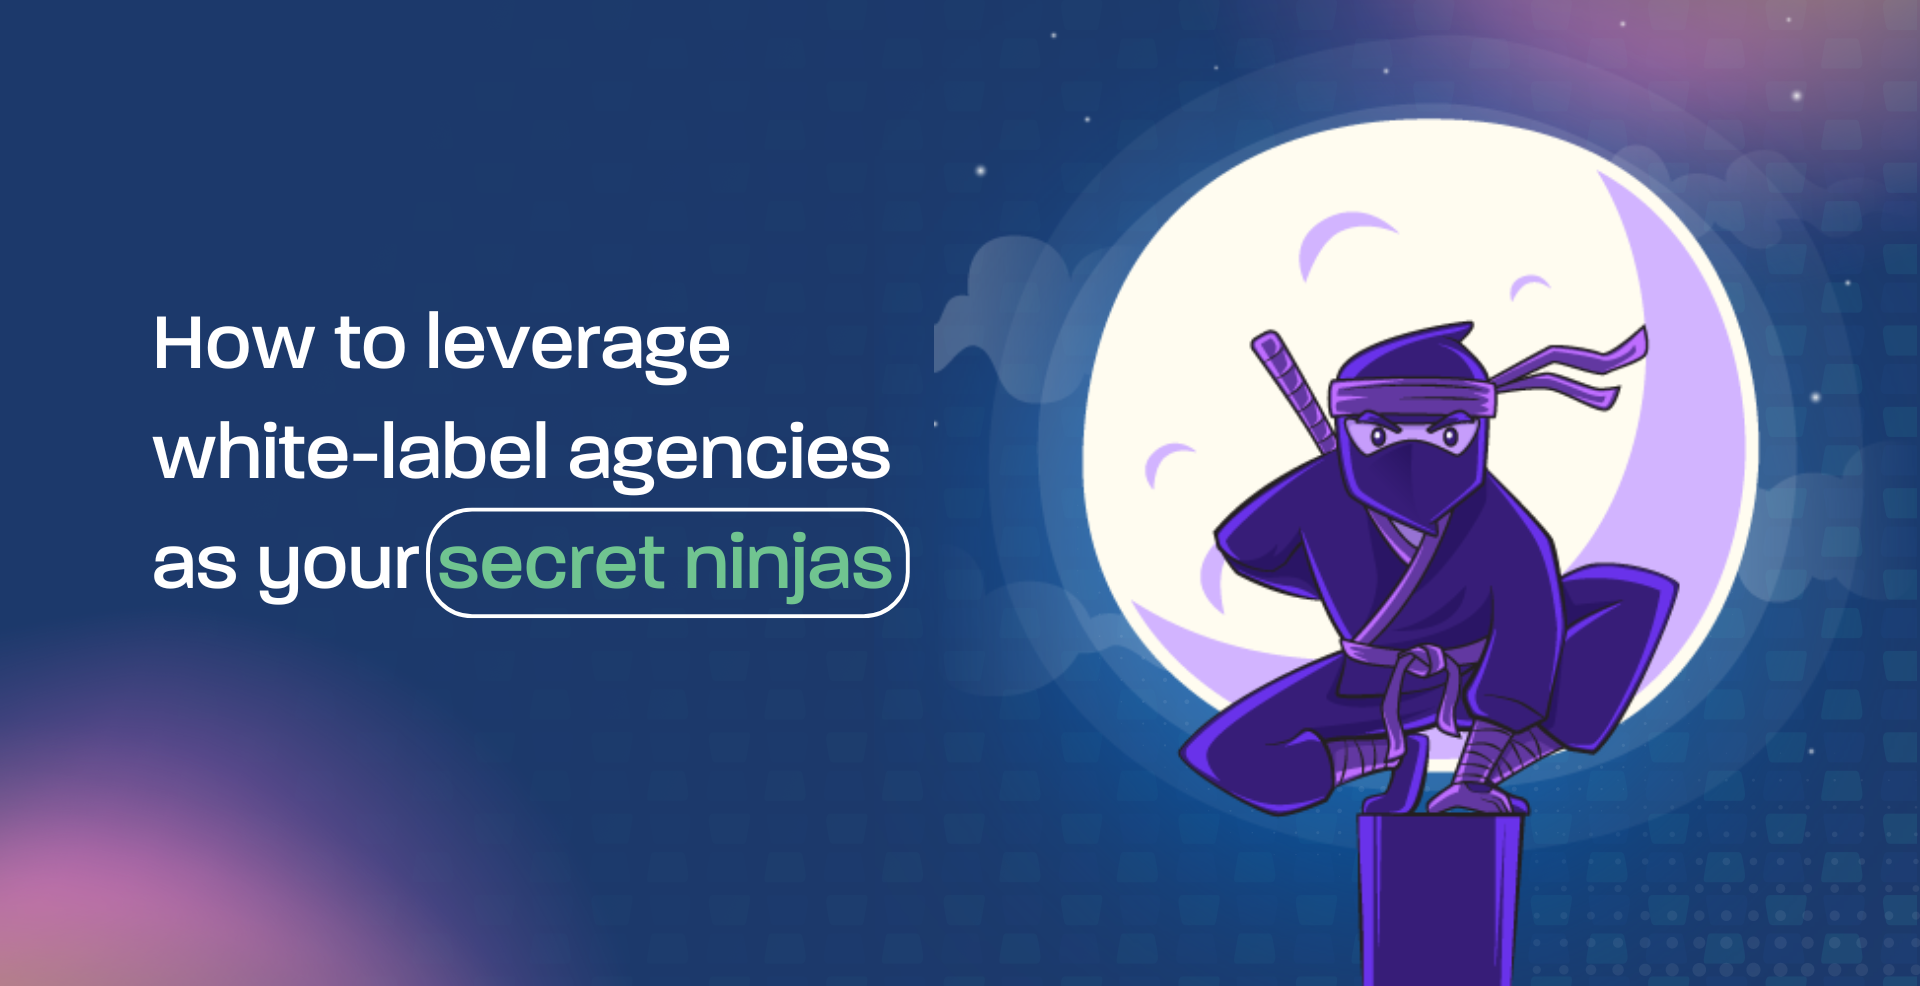 How to leverage white-label agencies as your secret ninjas